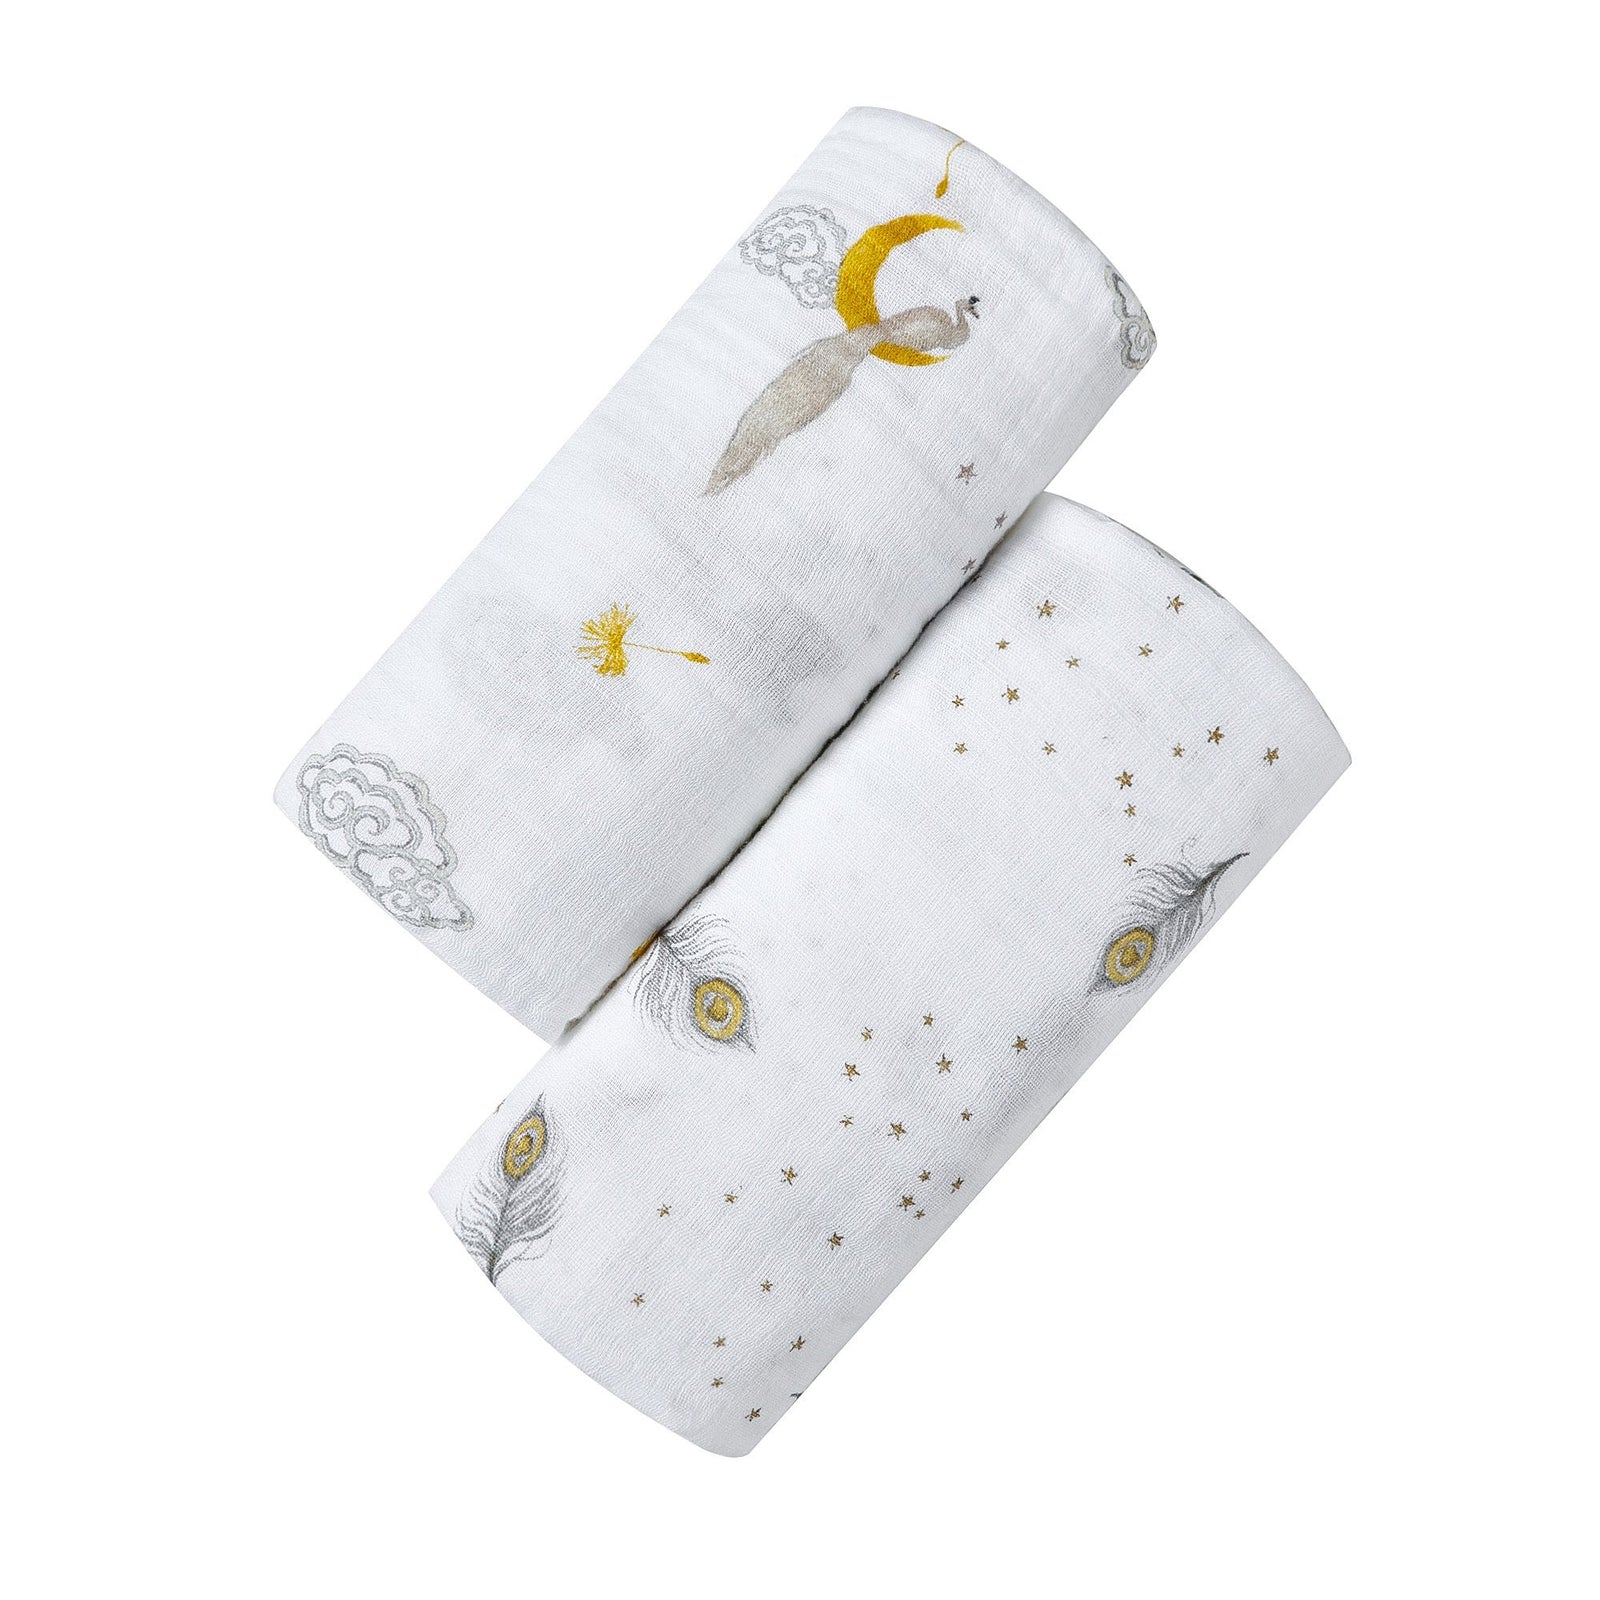 Sweet Dreams Soft Organic Cotton Swaddle Set for Home or On the Go